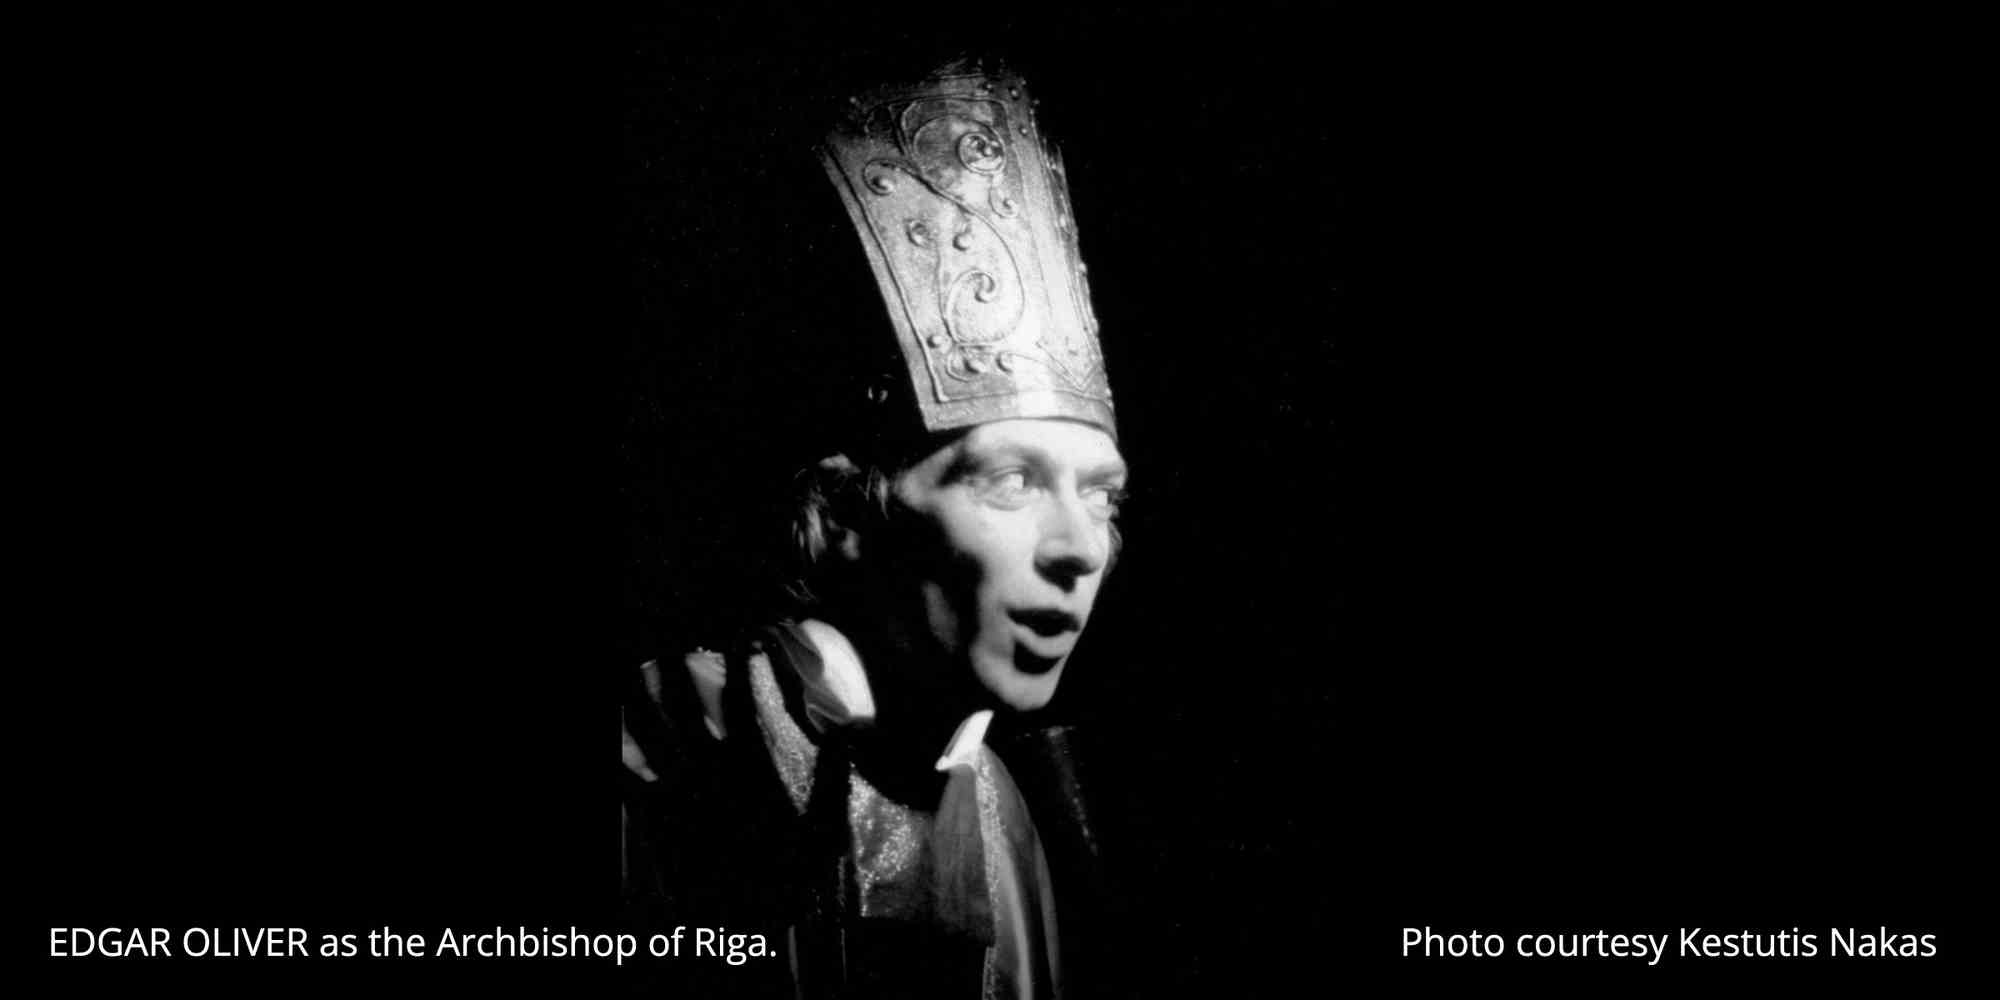 Edgar Oliver as the archbishop of Riga